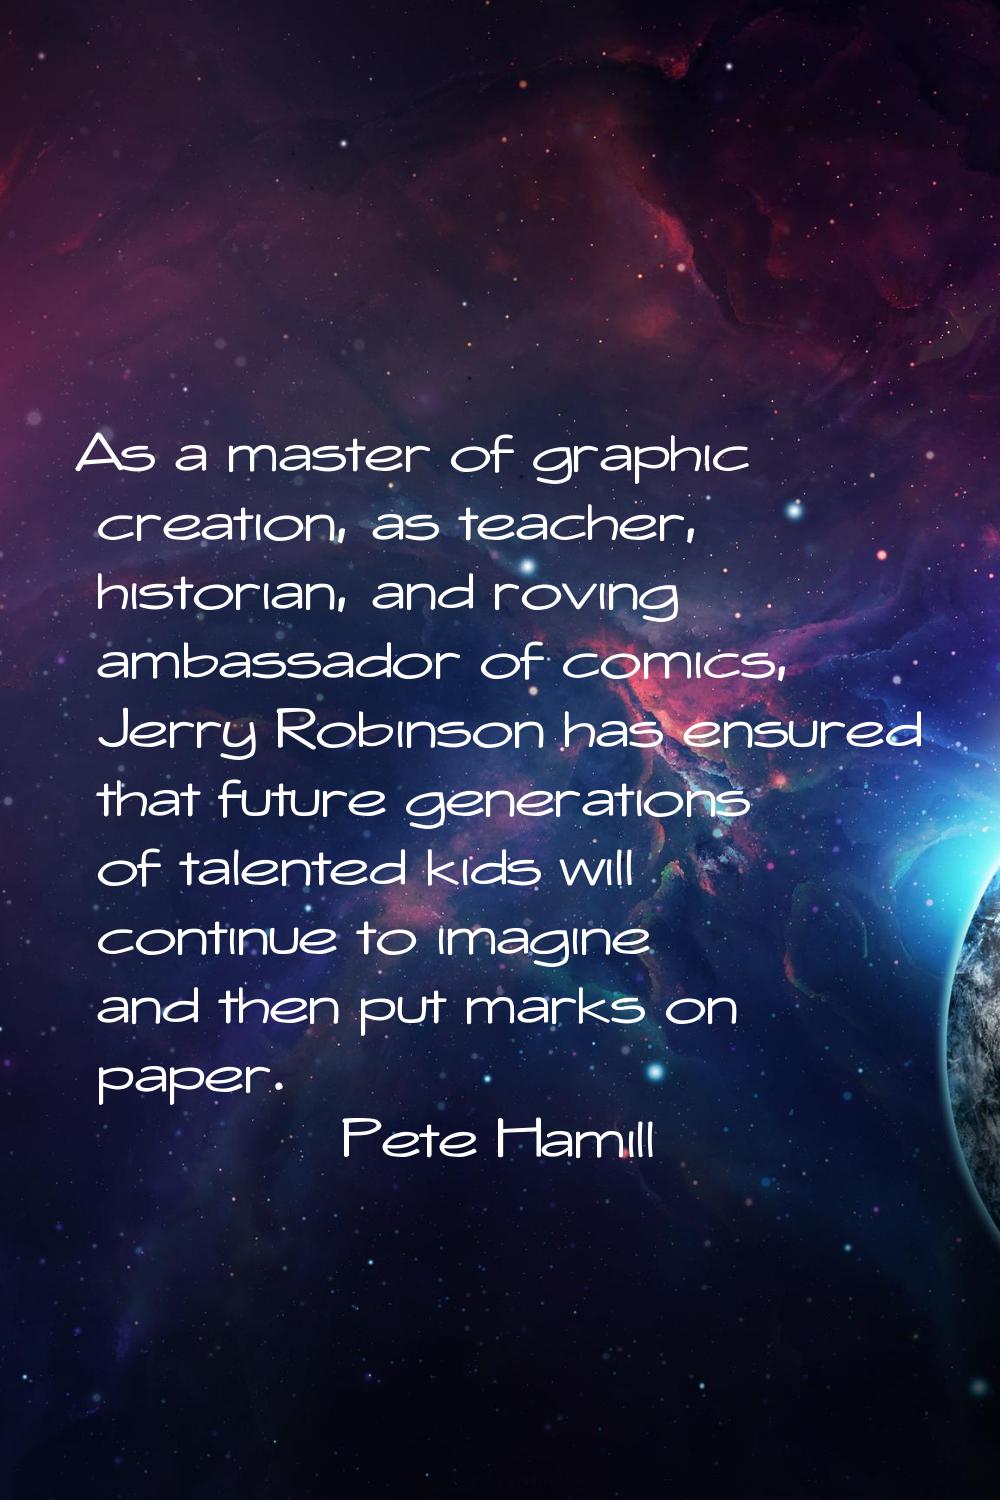 As a master of graphic creation, as teacher, historian, and roving ambassador of comics, Jerry Robi